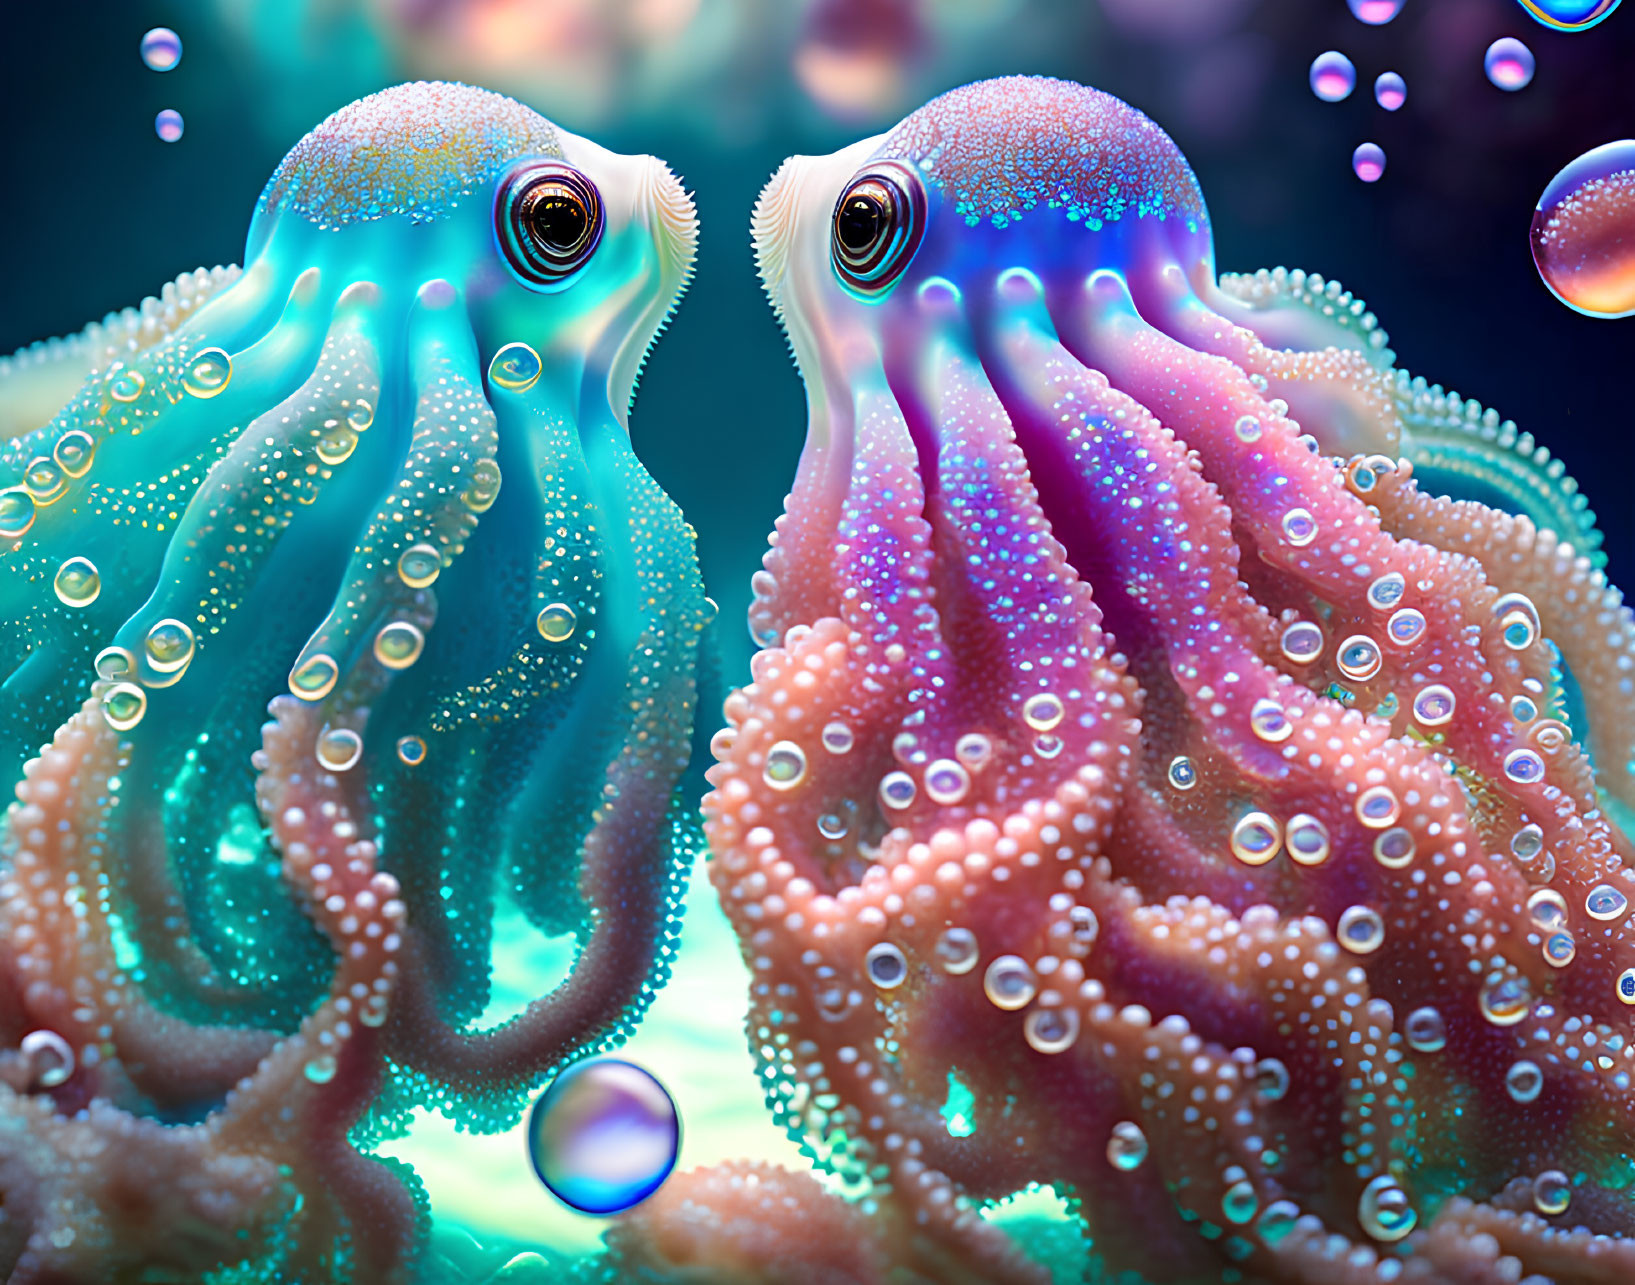 Colorful digital art: Two vibrant octopus-like creatures with expressive eyes and iridescent tentacles